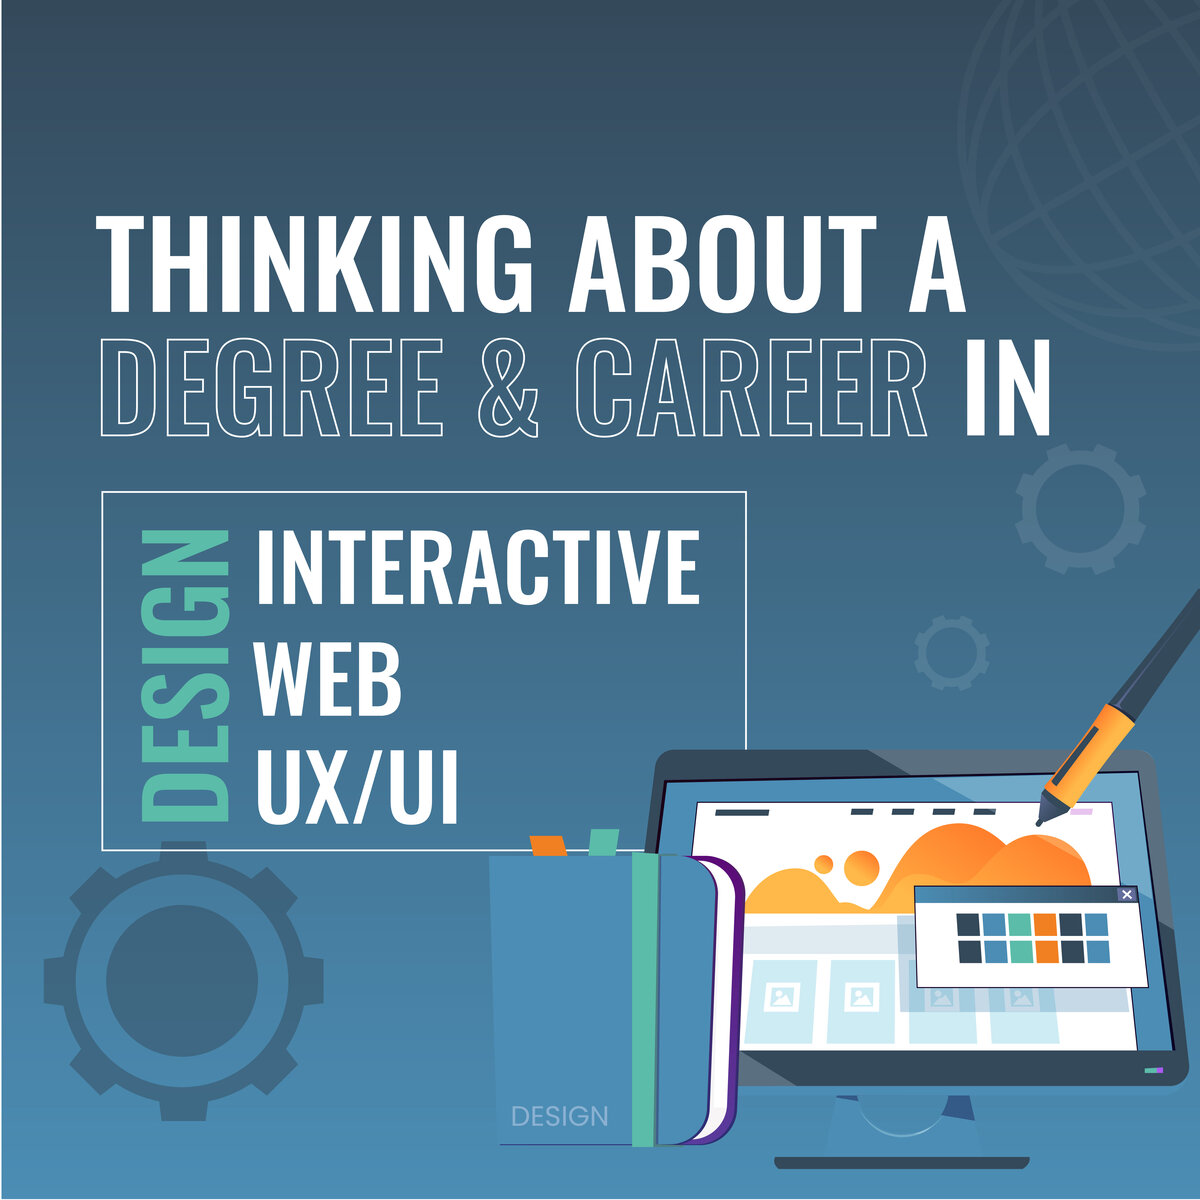 Thinking about a degree and career in Design (Interactive, Web, UX/UI)